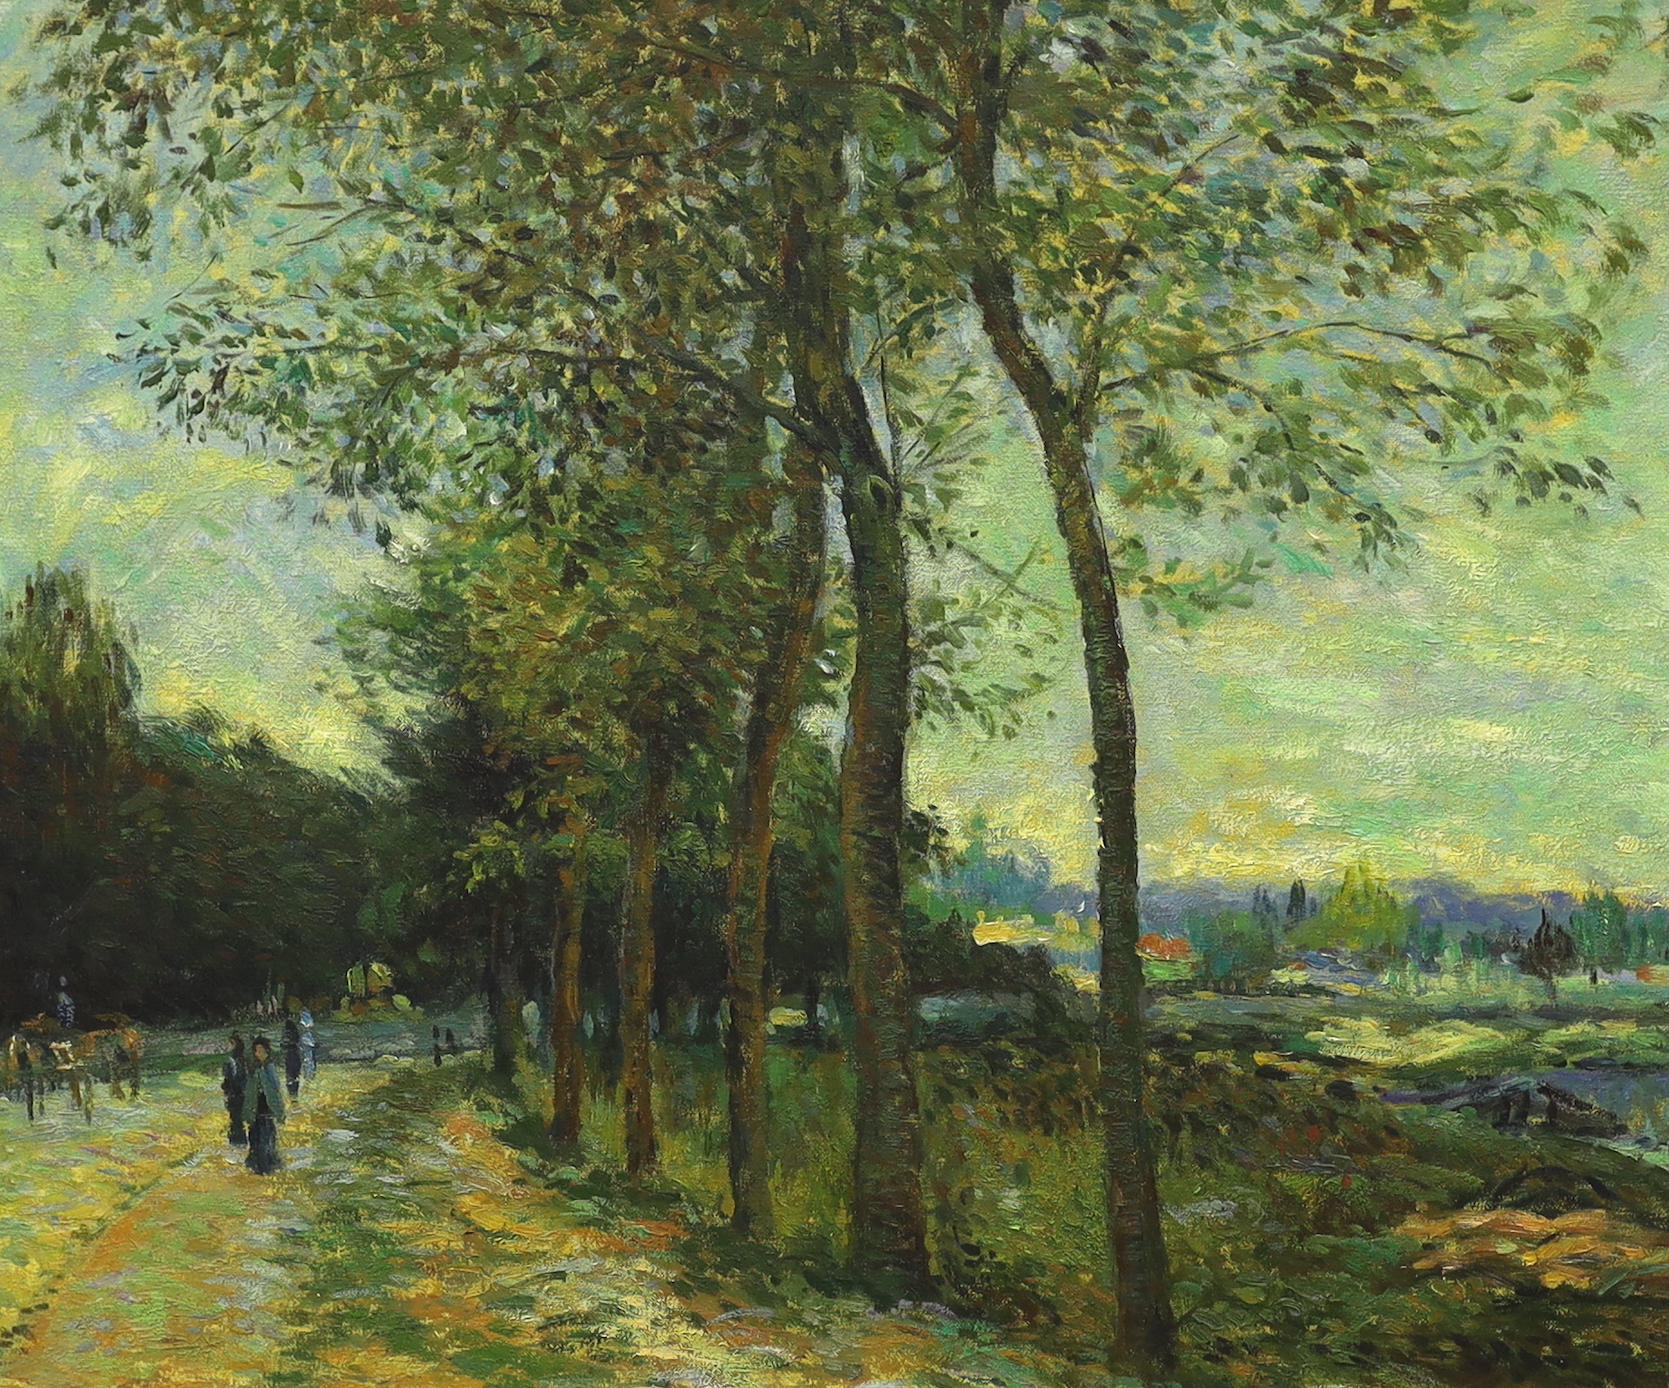 Impressionist Style, oil on canvas, Tree lined pathway with figures, 60 x 50cm